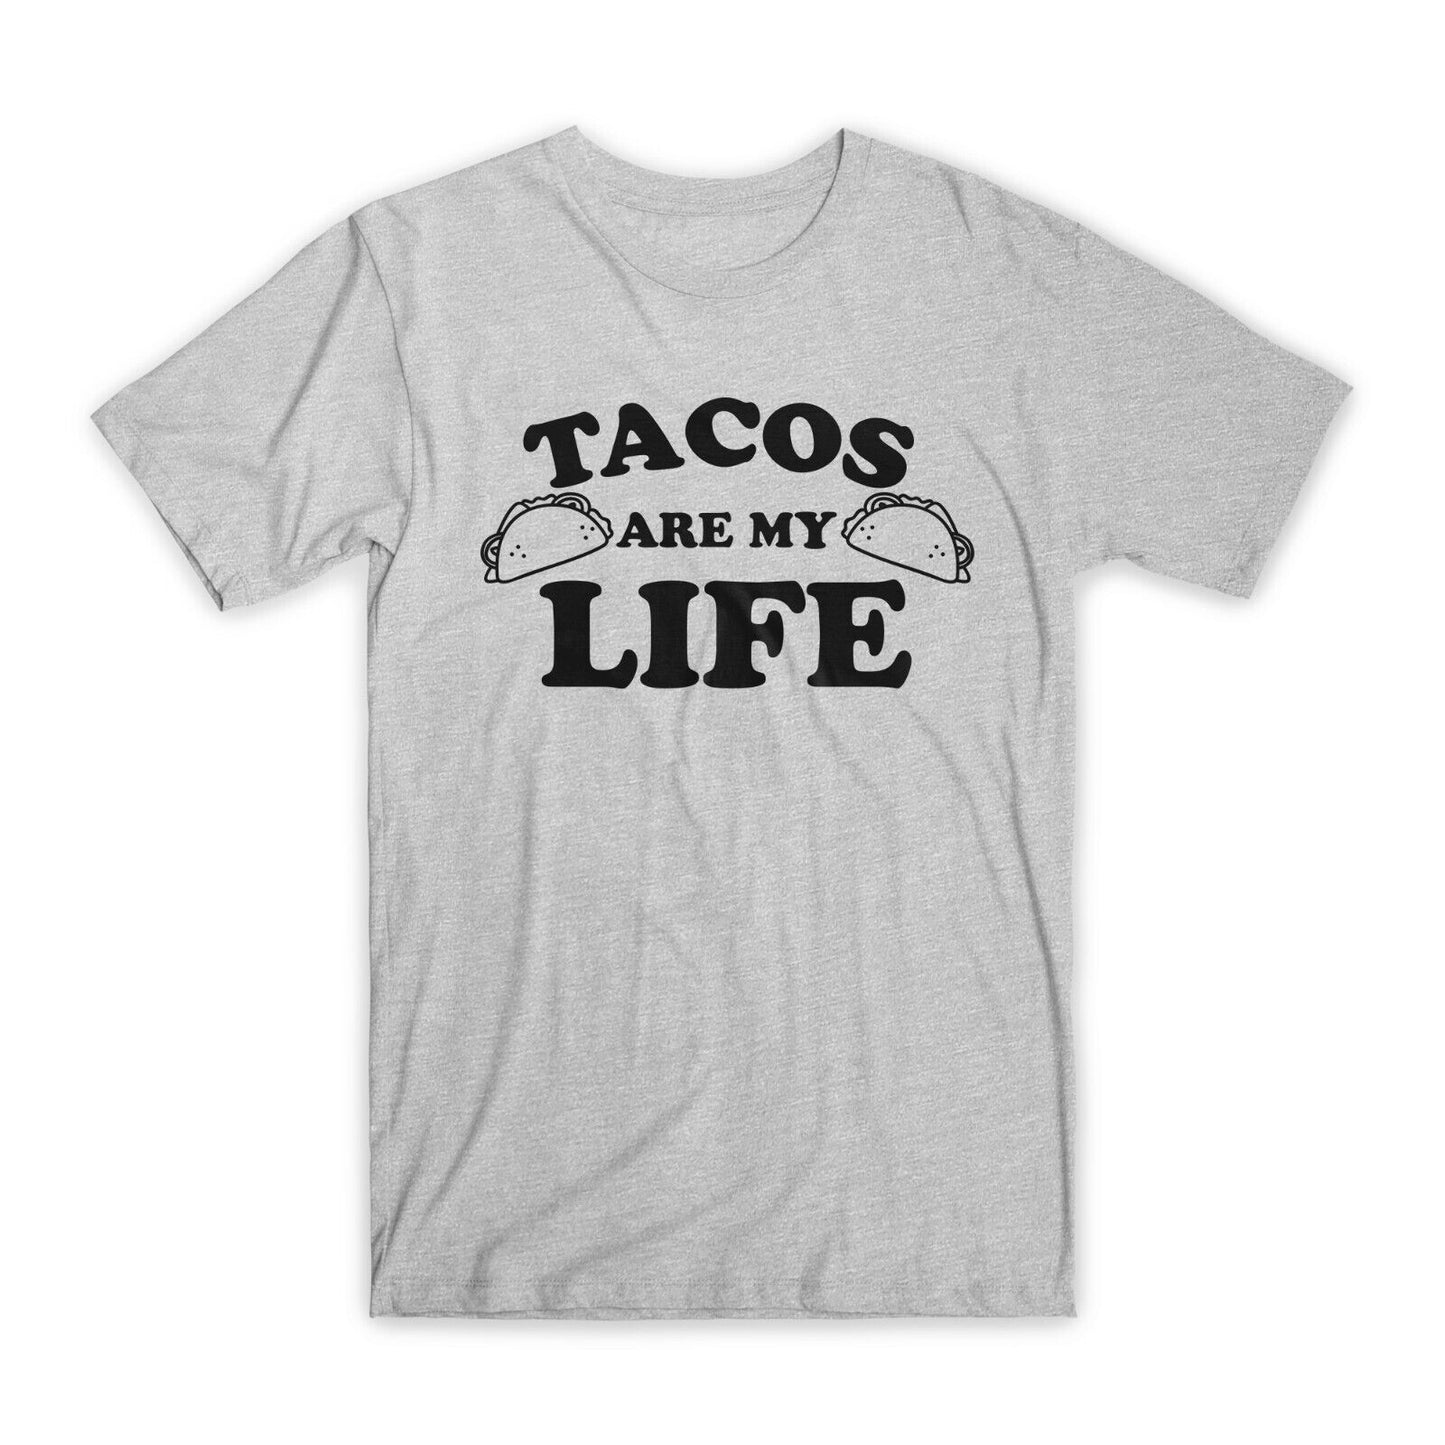 Tacos Are My Life Print T-Shirt Premium Soft Cotton Crew Neck Funny Tee Gift NEW